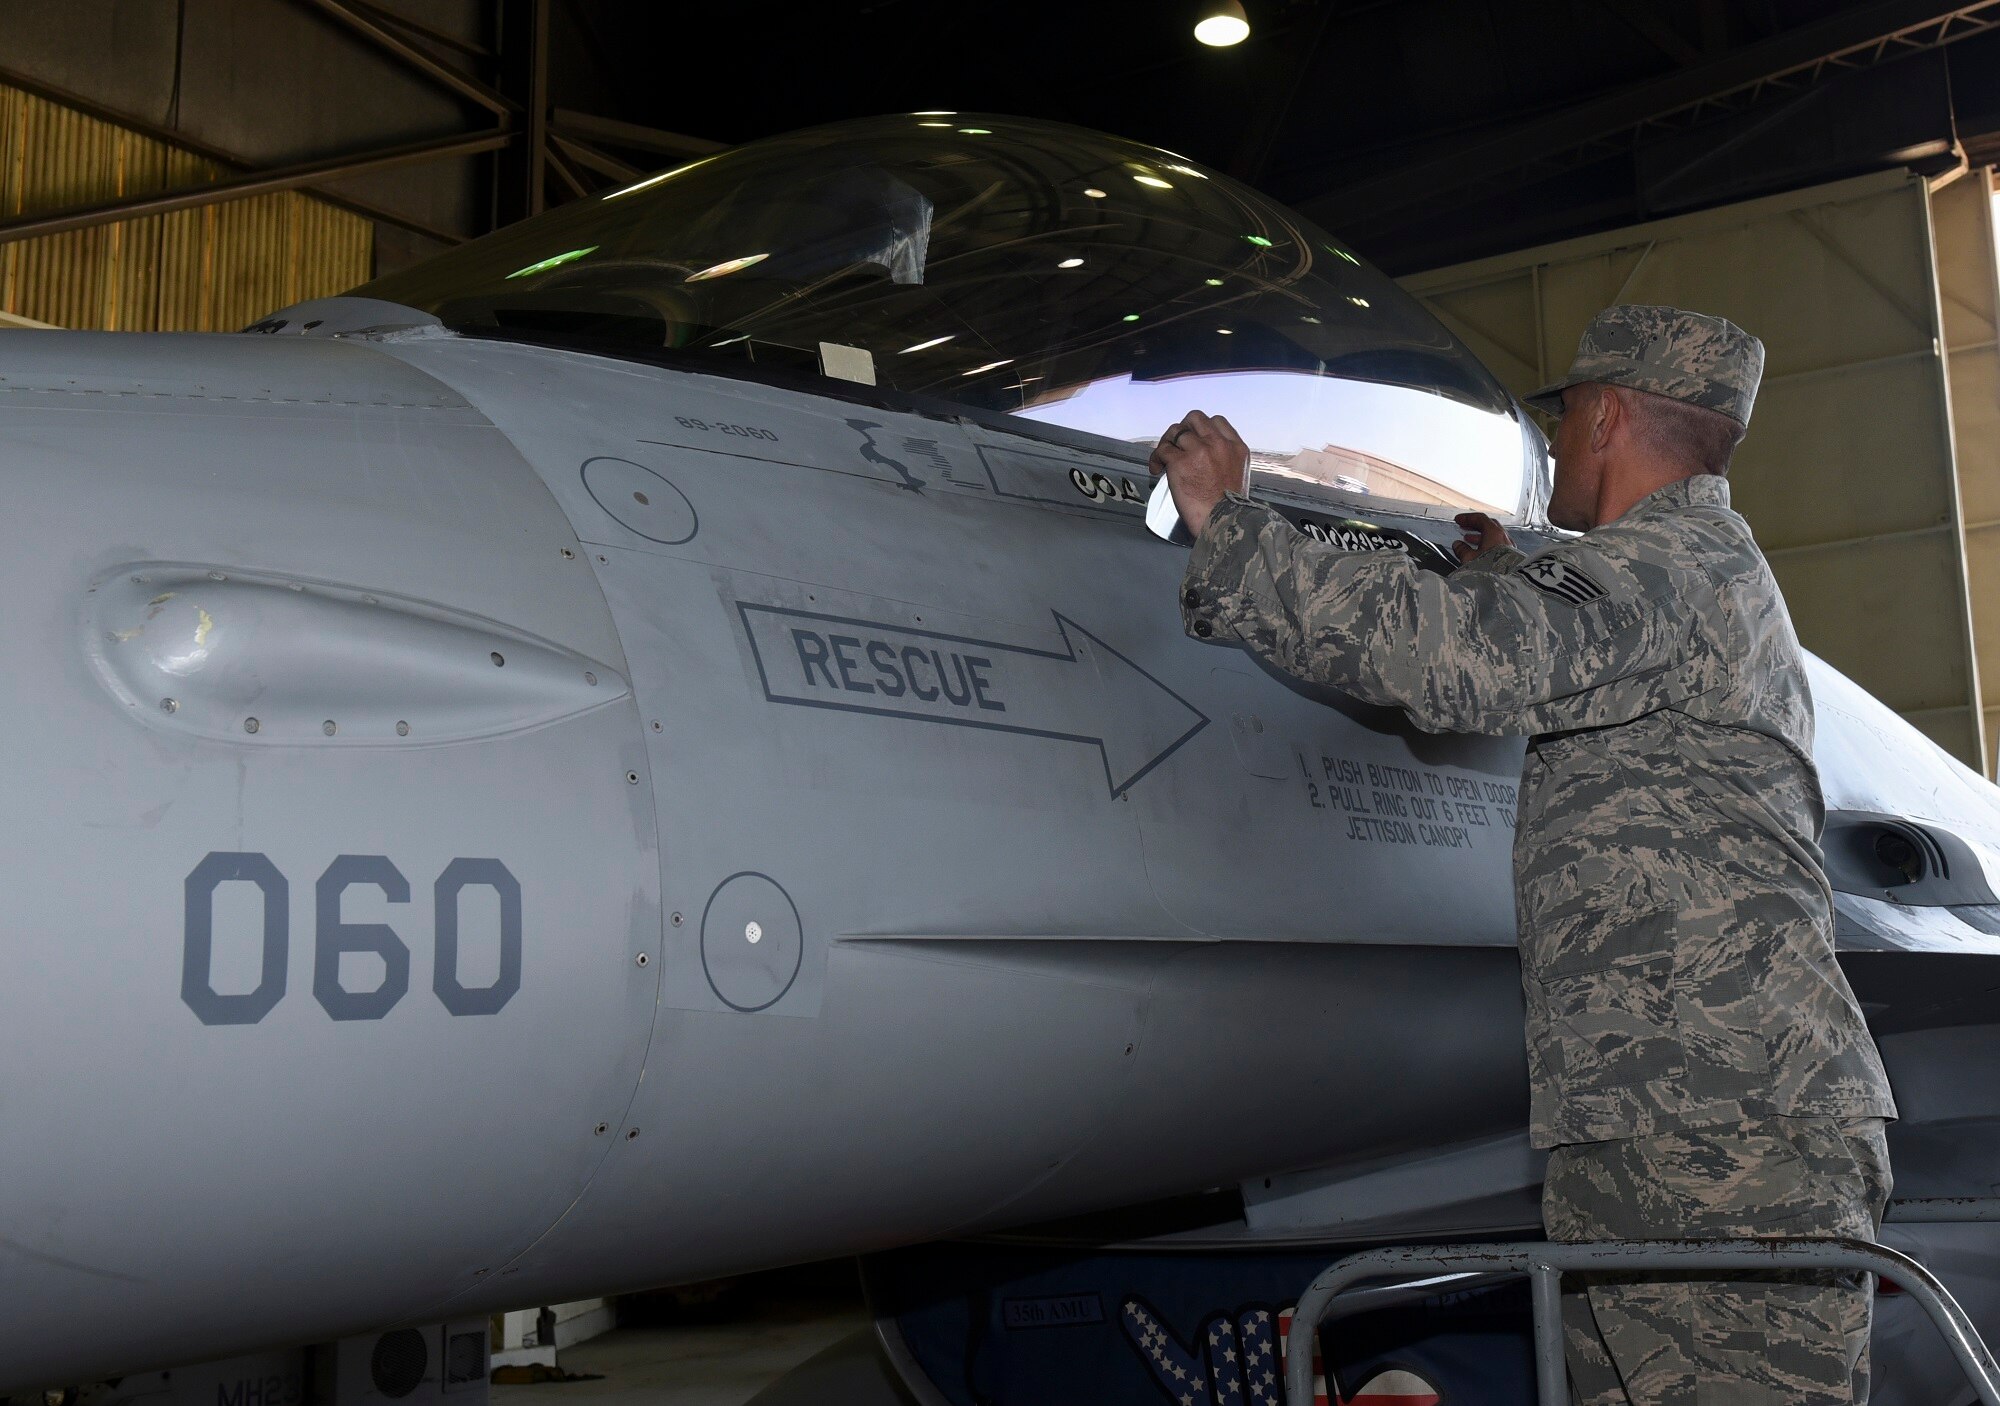 U.S. Air Force Staff Sgt. Shane McGowen, 35th Aircraft Maintenance Unit F-16 Fighting Falcon crew chief, reveals the name of Col. David Shoemaker, 8th Fighter Wing commander, on a jet during a change of command ceremony at Kunsan Air Base, Republic of Korea, May 25, 2017. Kunsan hosted a change of command ceremony, in which Col. Todd Dozier relinquished command of the 8th Fighter Wing to Col. David Shoemaker. (U.S. Air Force photo by Senior Airman Michael Hunsaker/Released)